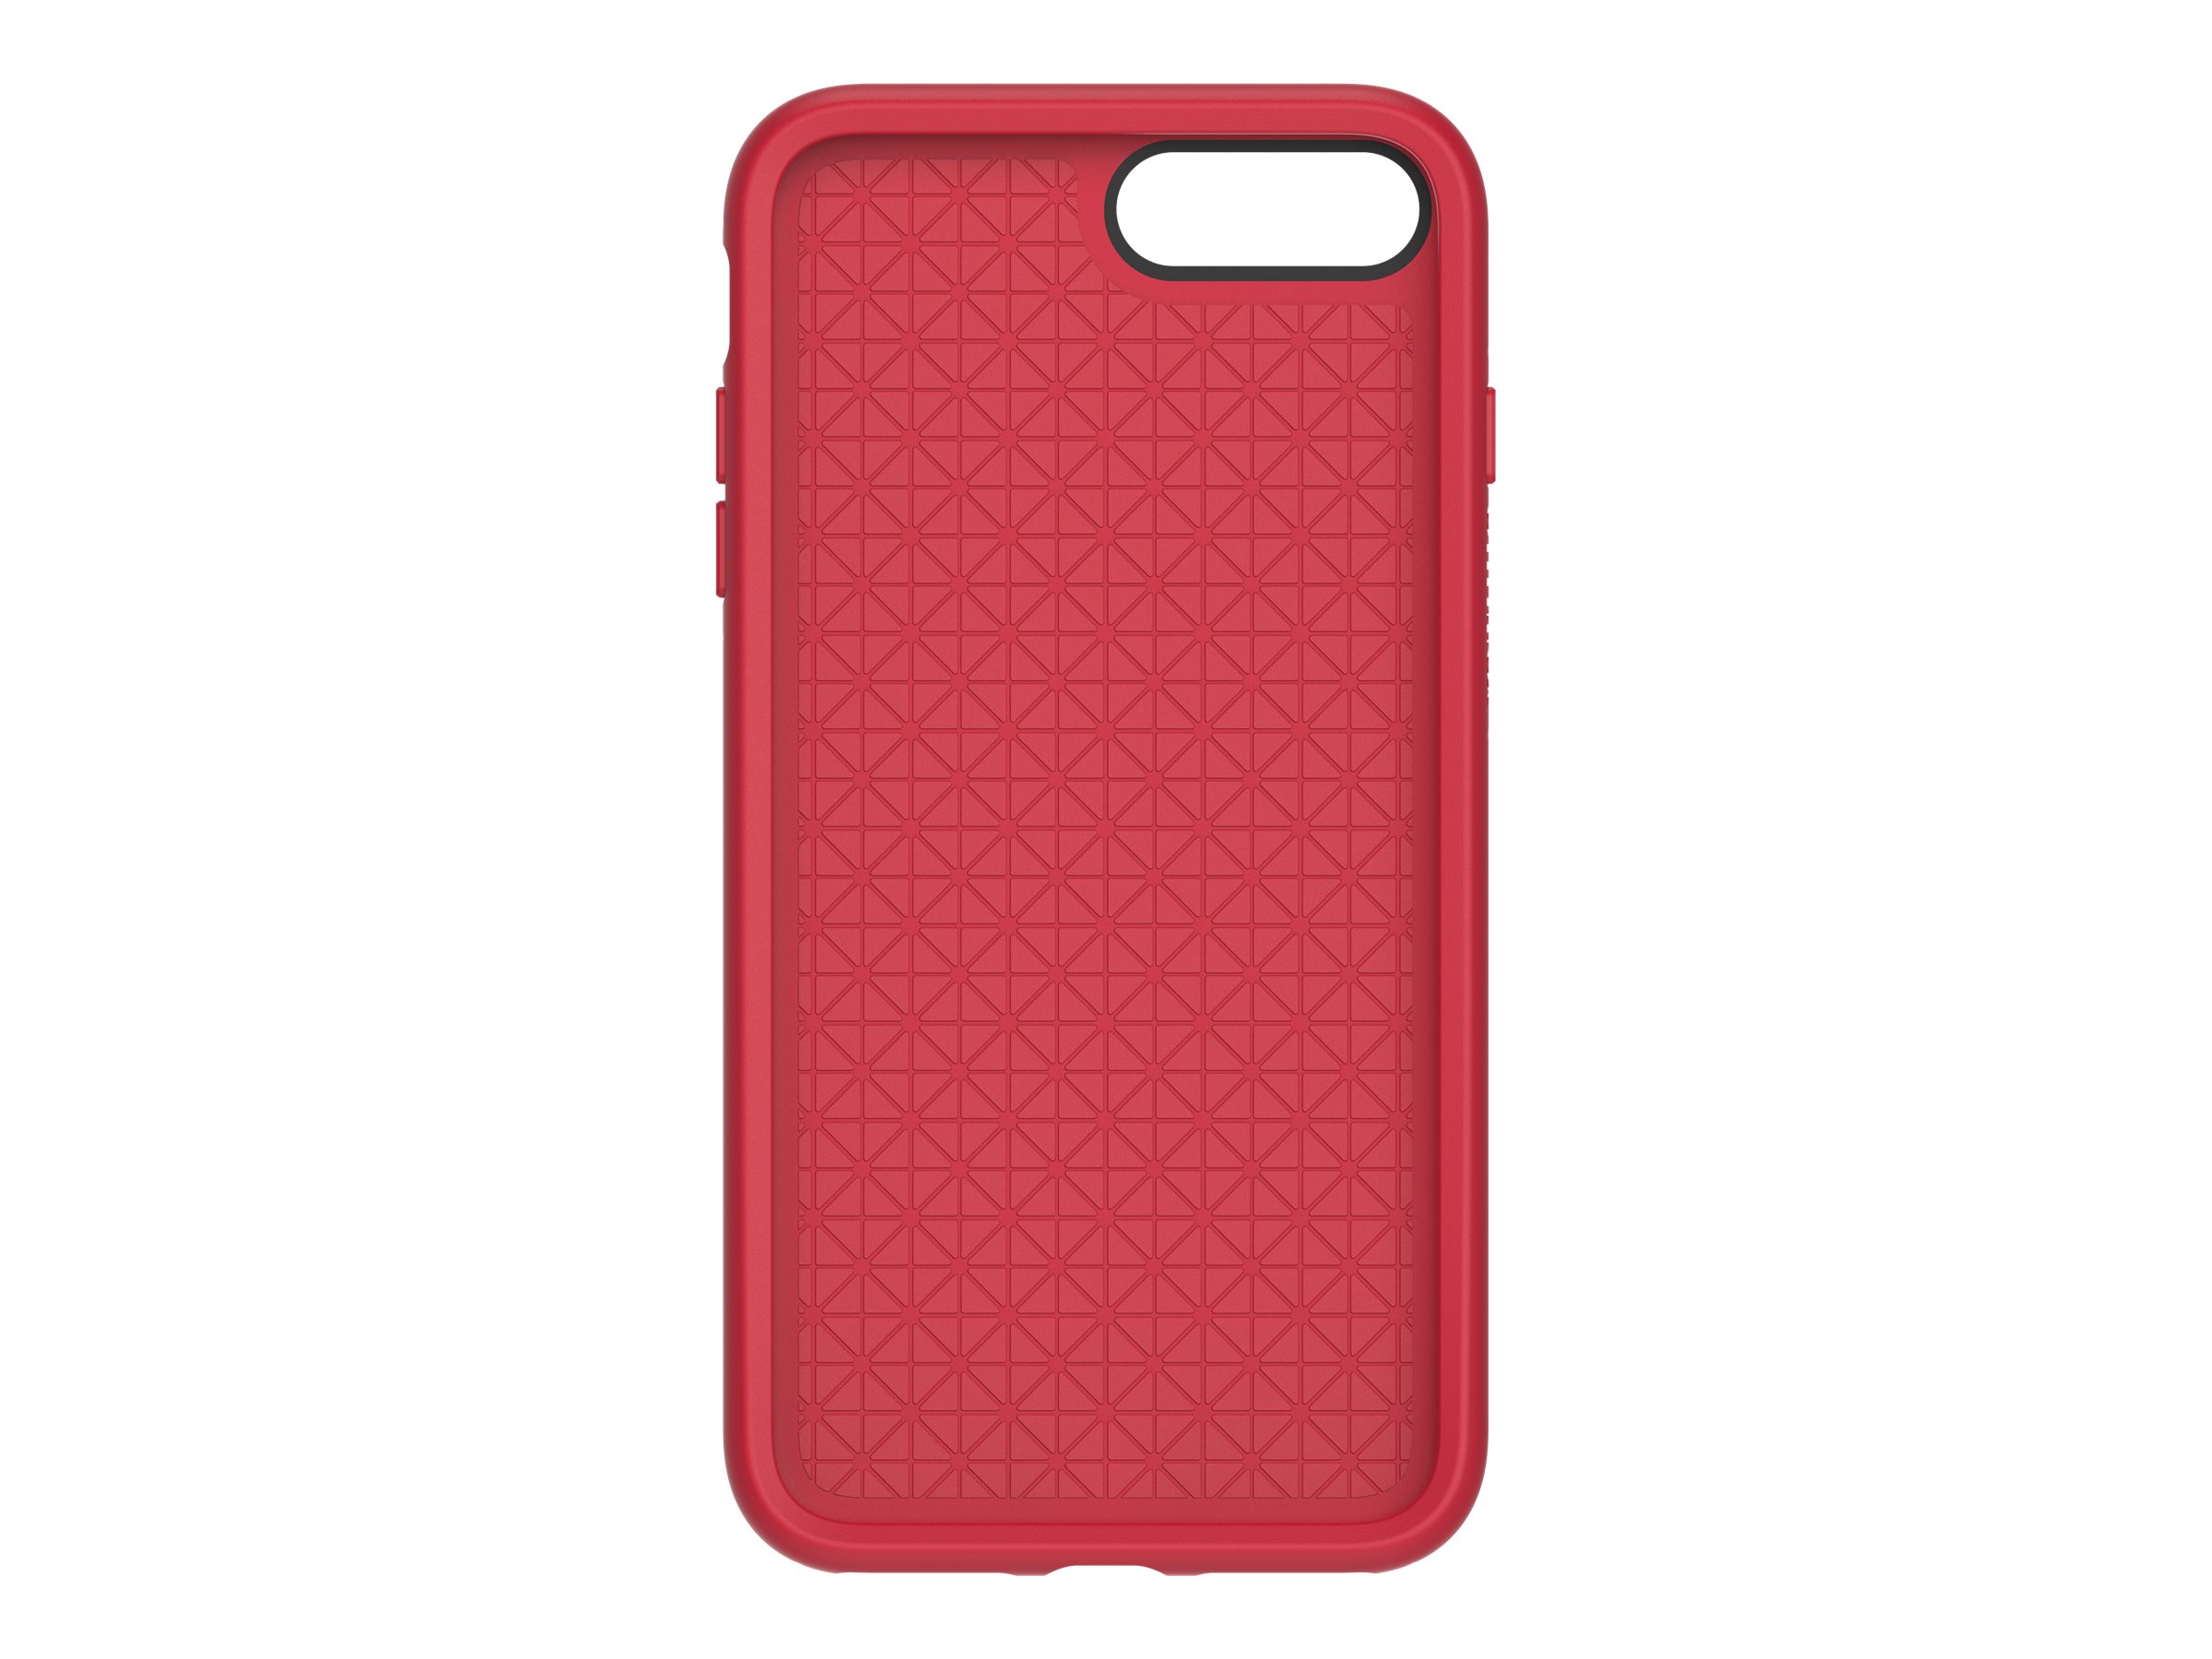 OtterBox Symmetry Series Case for Apple iPhone 7 Plus, Rosso Corsa - image 1 of 8